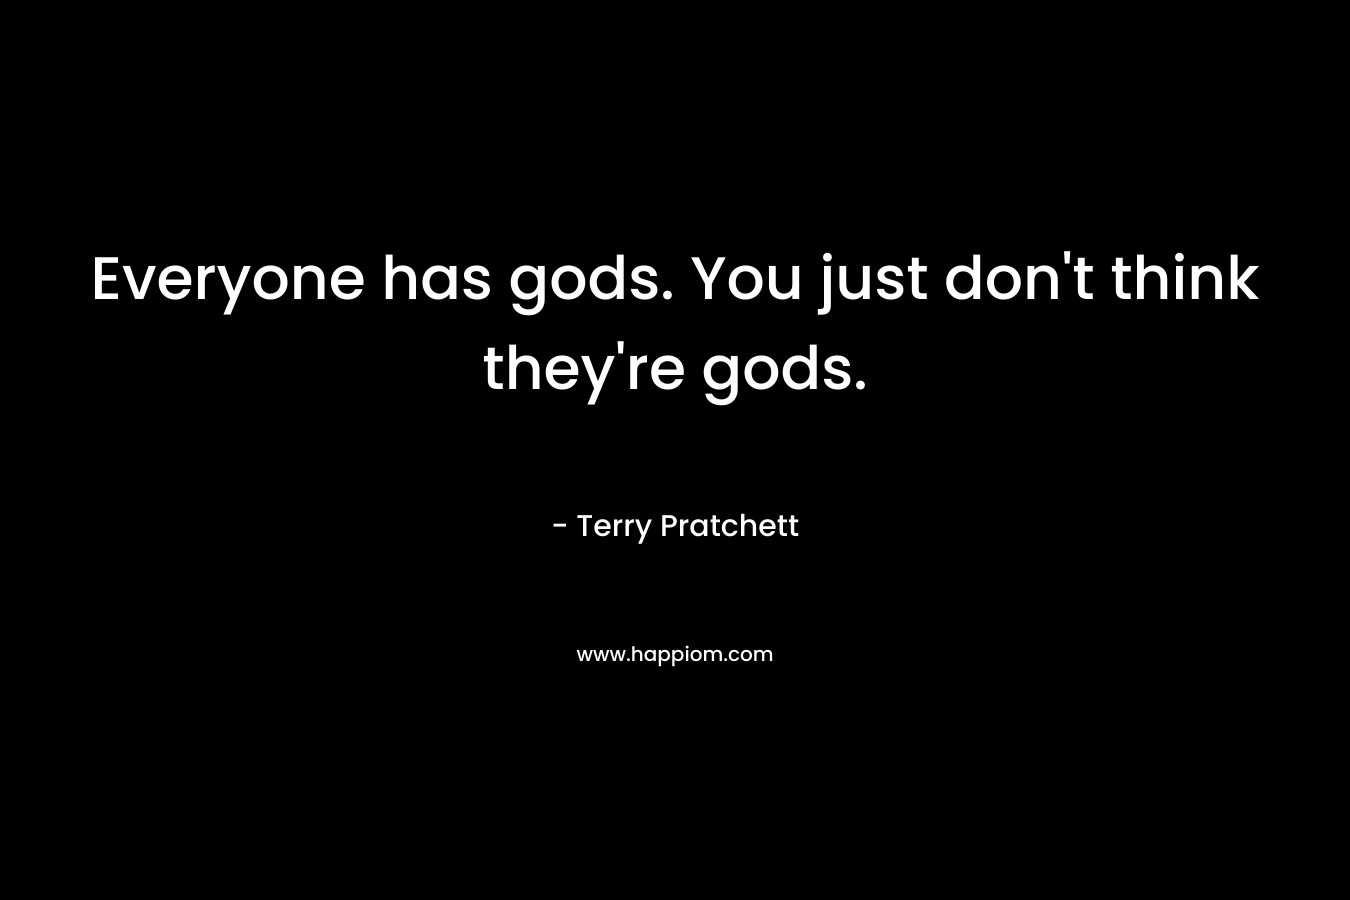 Everyone has gods. You just don't think they're gods.